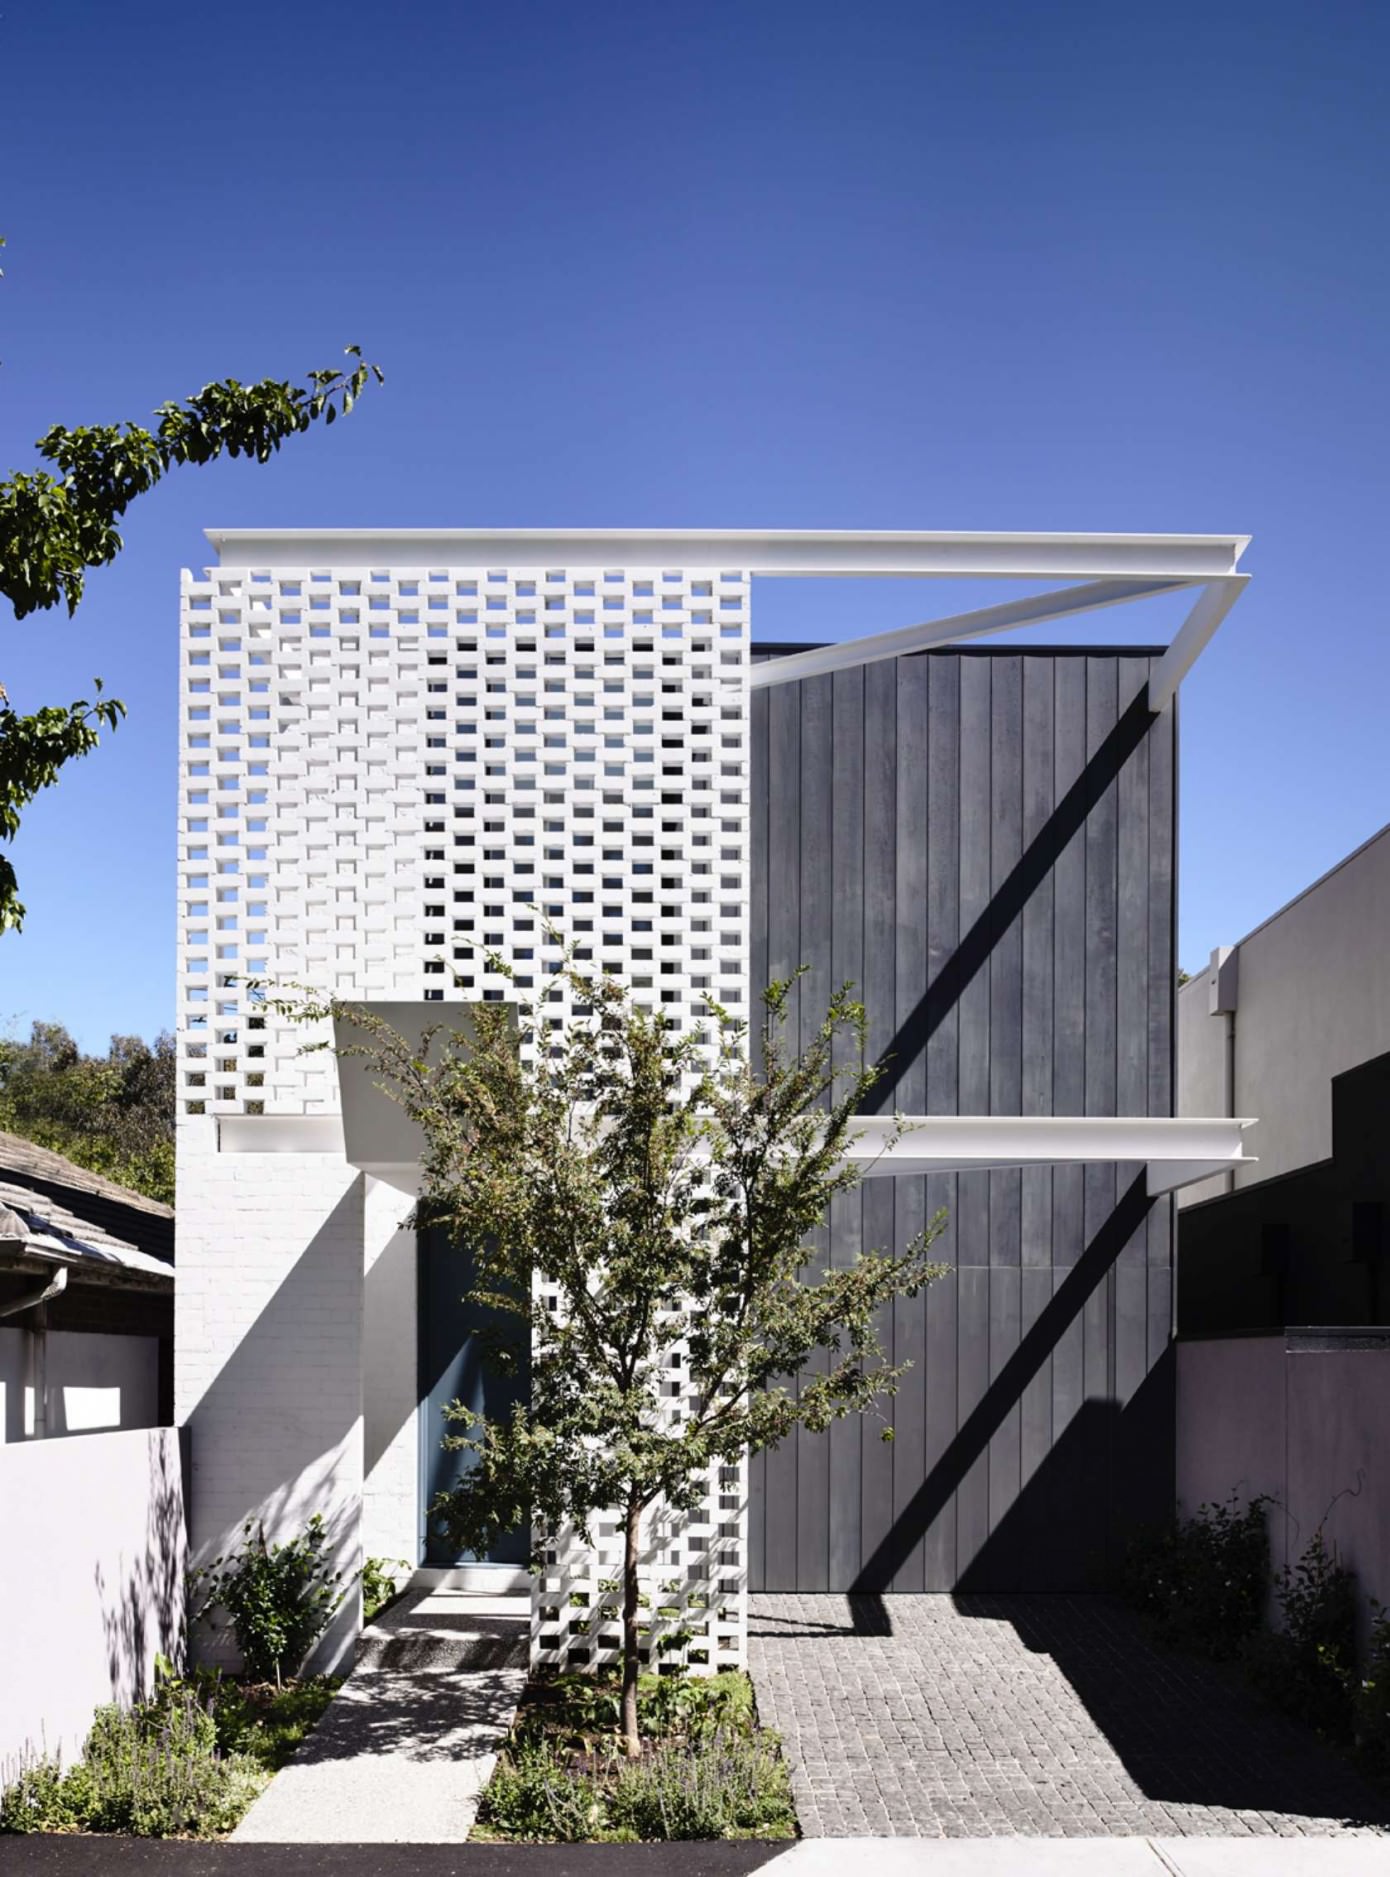 Fairbairn Road by Inglis Architects